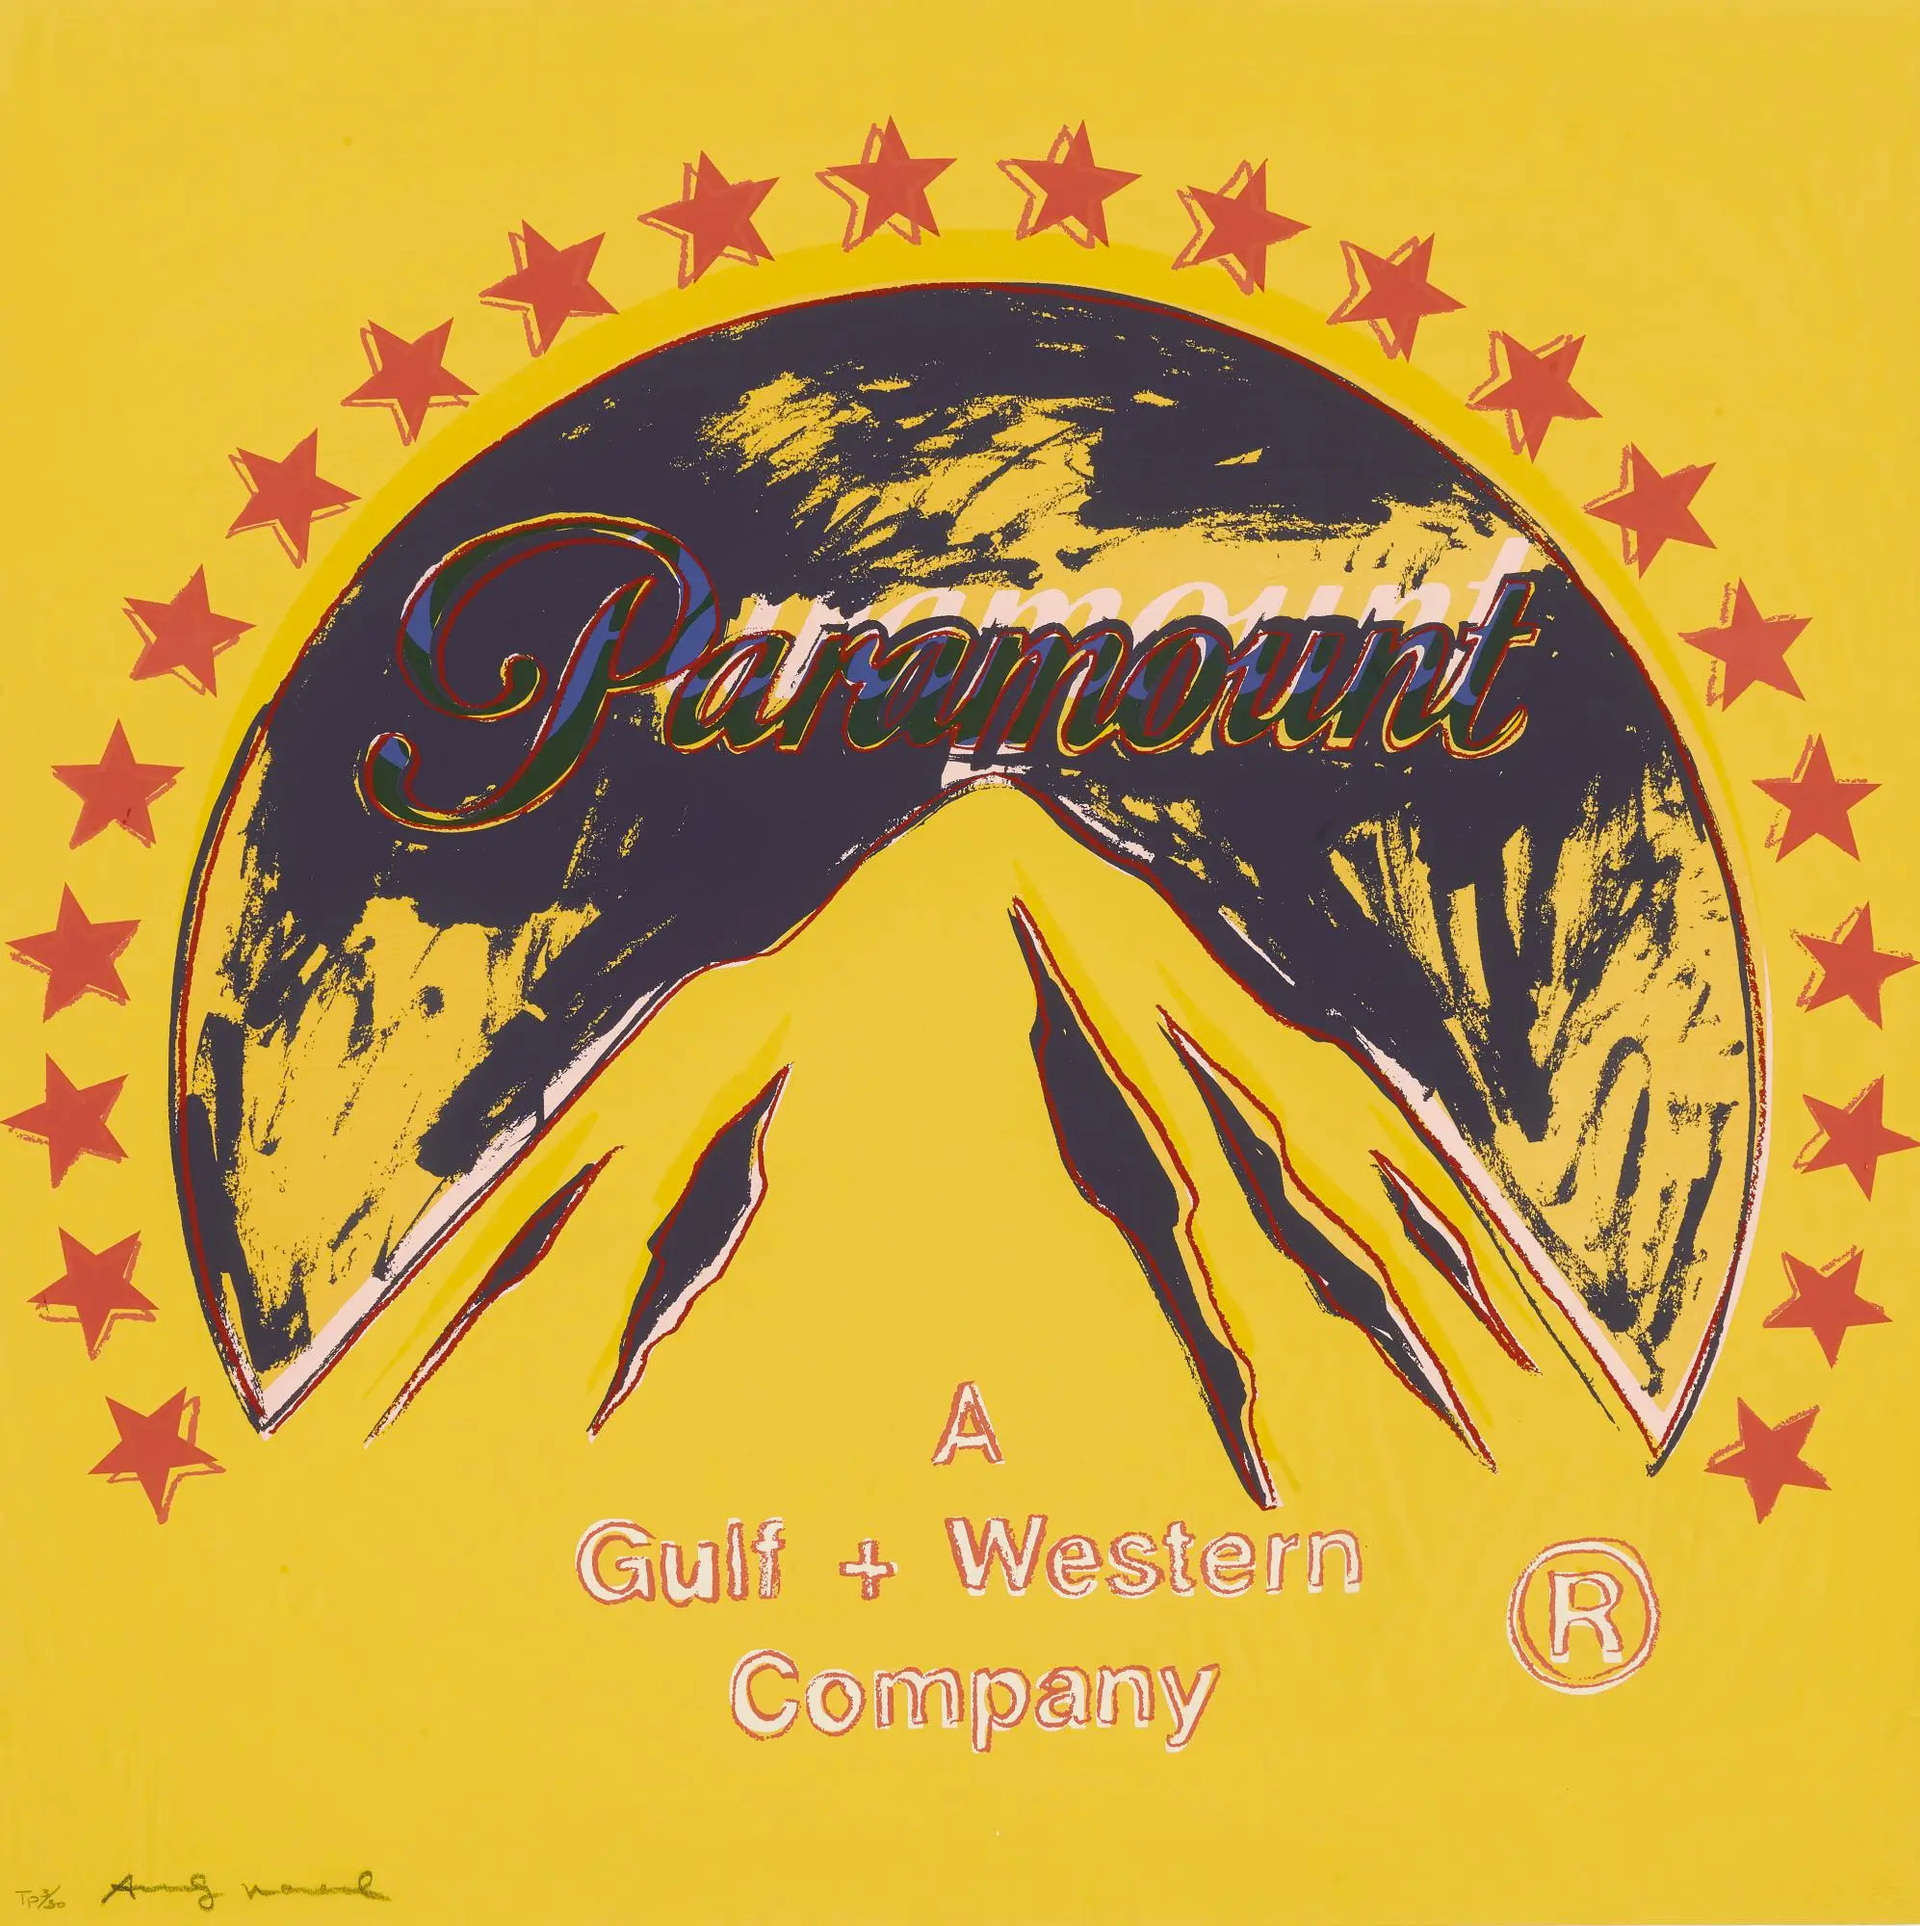 An image of a print by Andy Warhol, depicting the well-known film studio Paramount's logo against a yellow background.